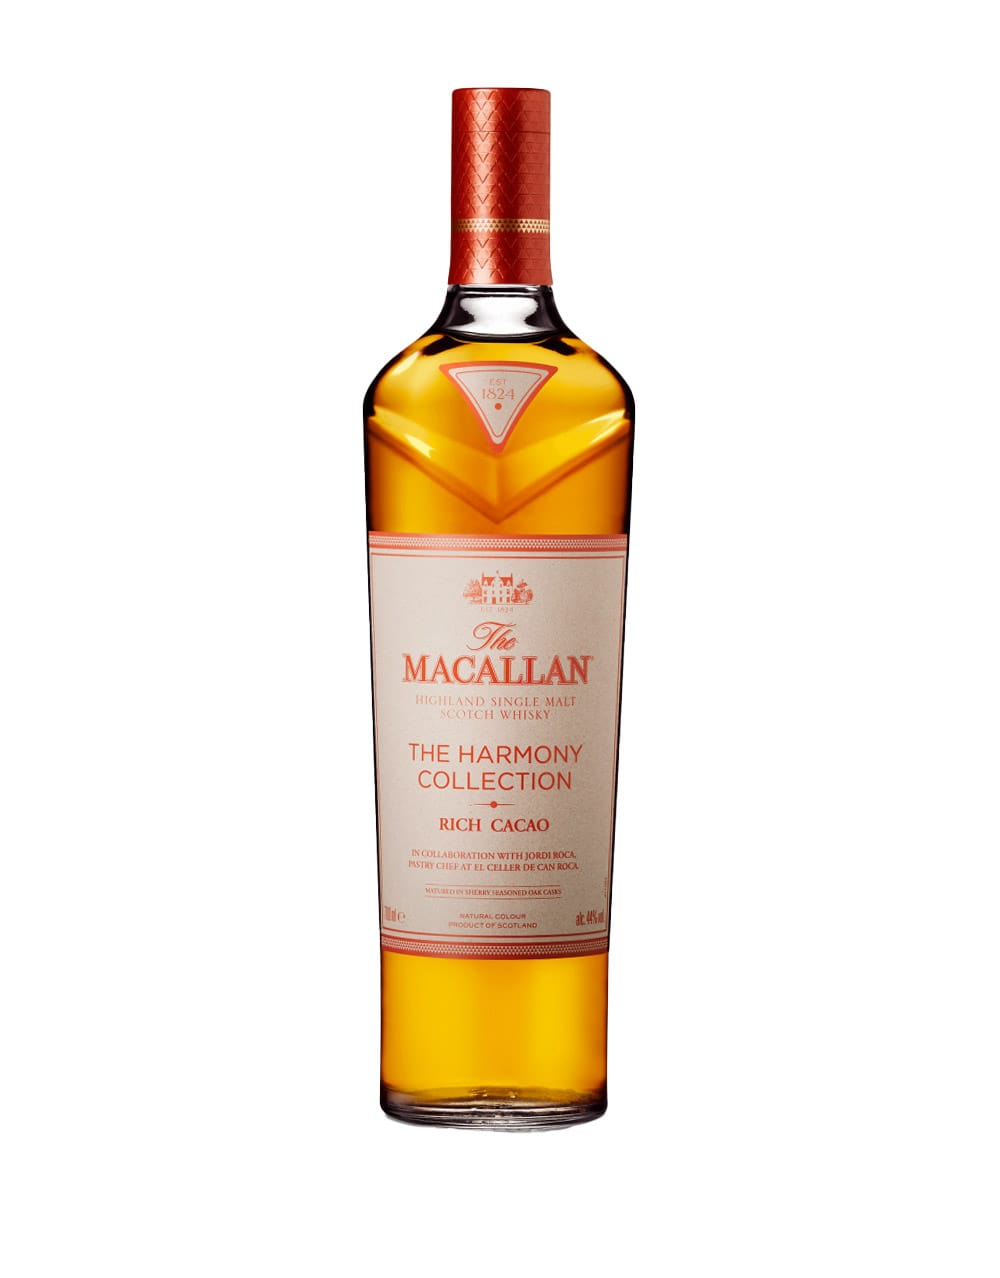 The Macallan The Harmony Collection Rich Cacao Scotch Whisky